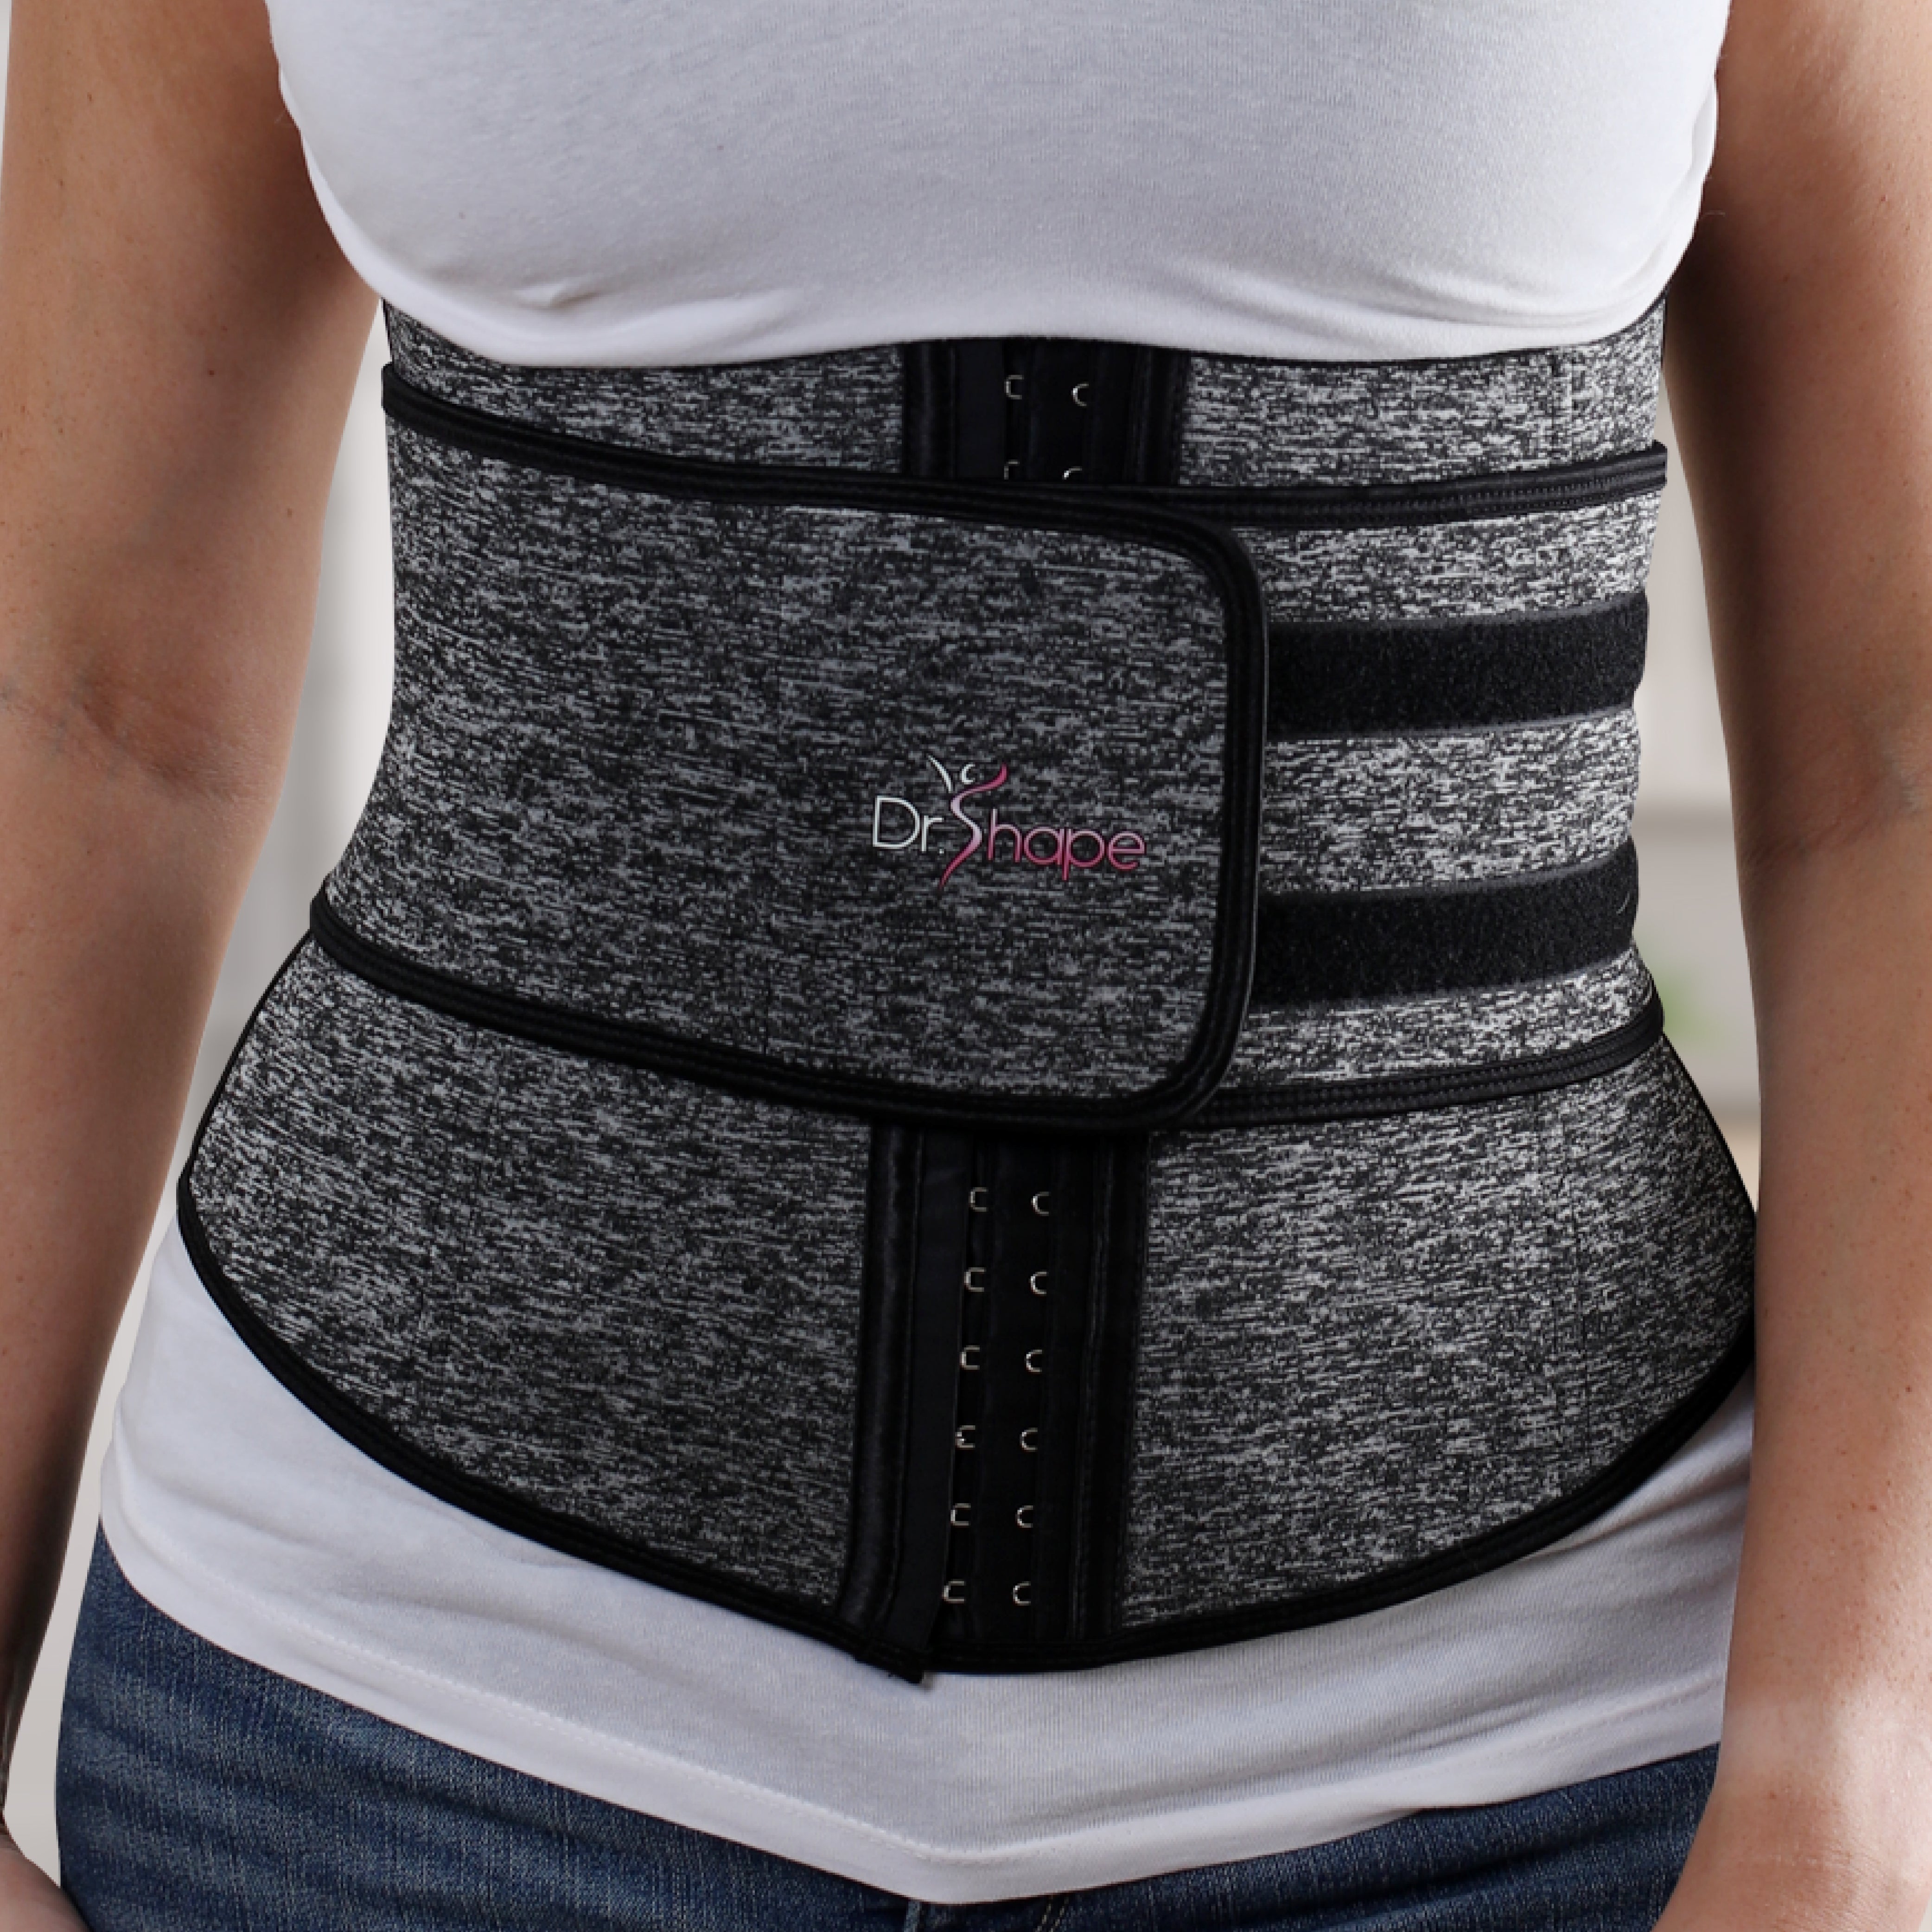 Plus Size Tummy Control Corset Waist Trainer Shape Your Body With